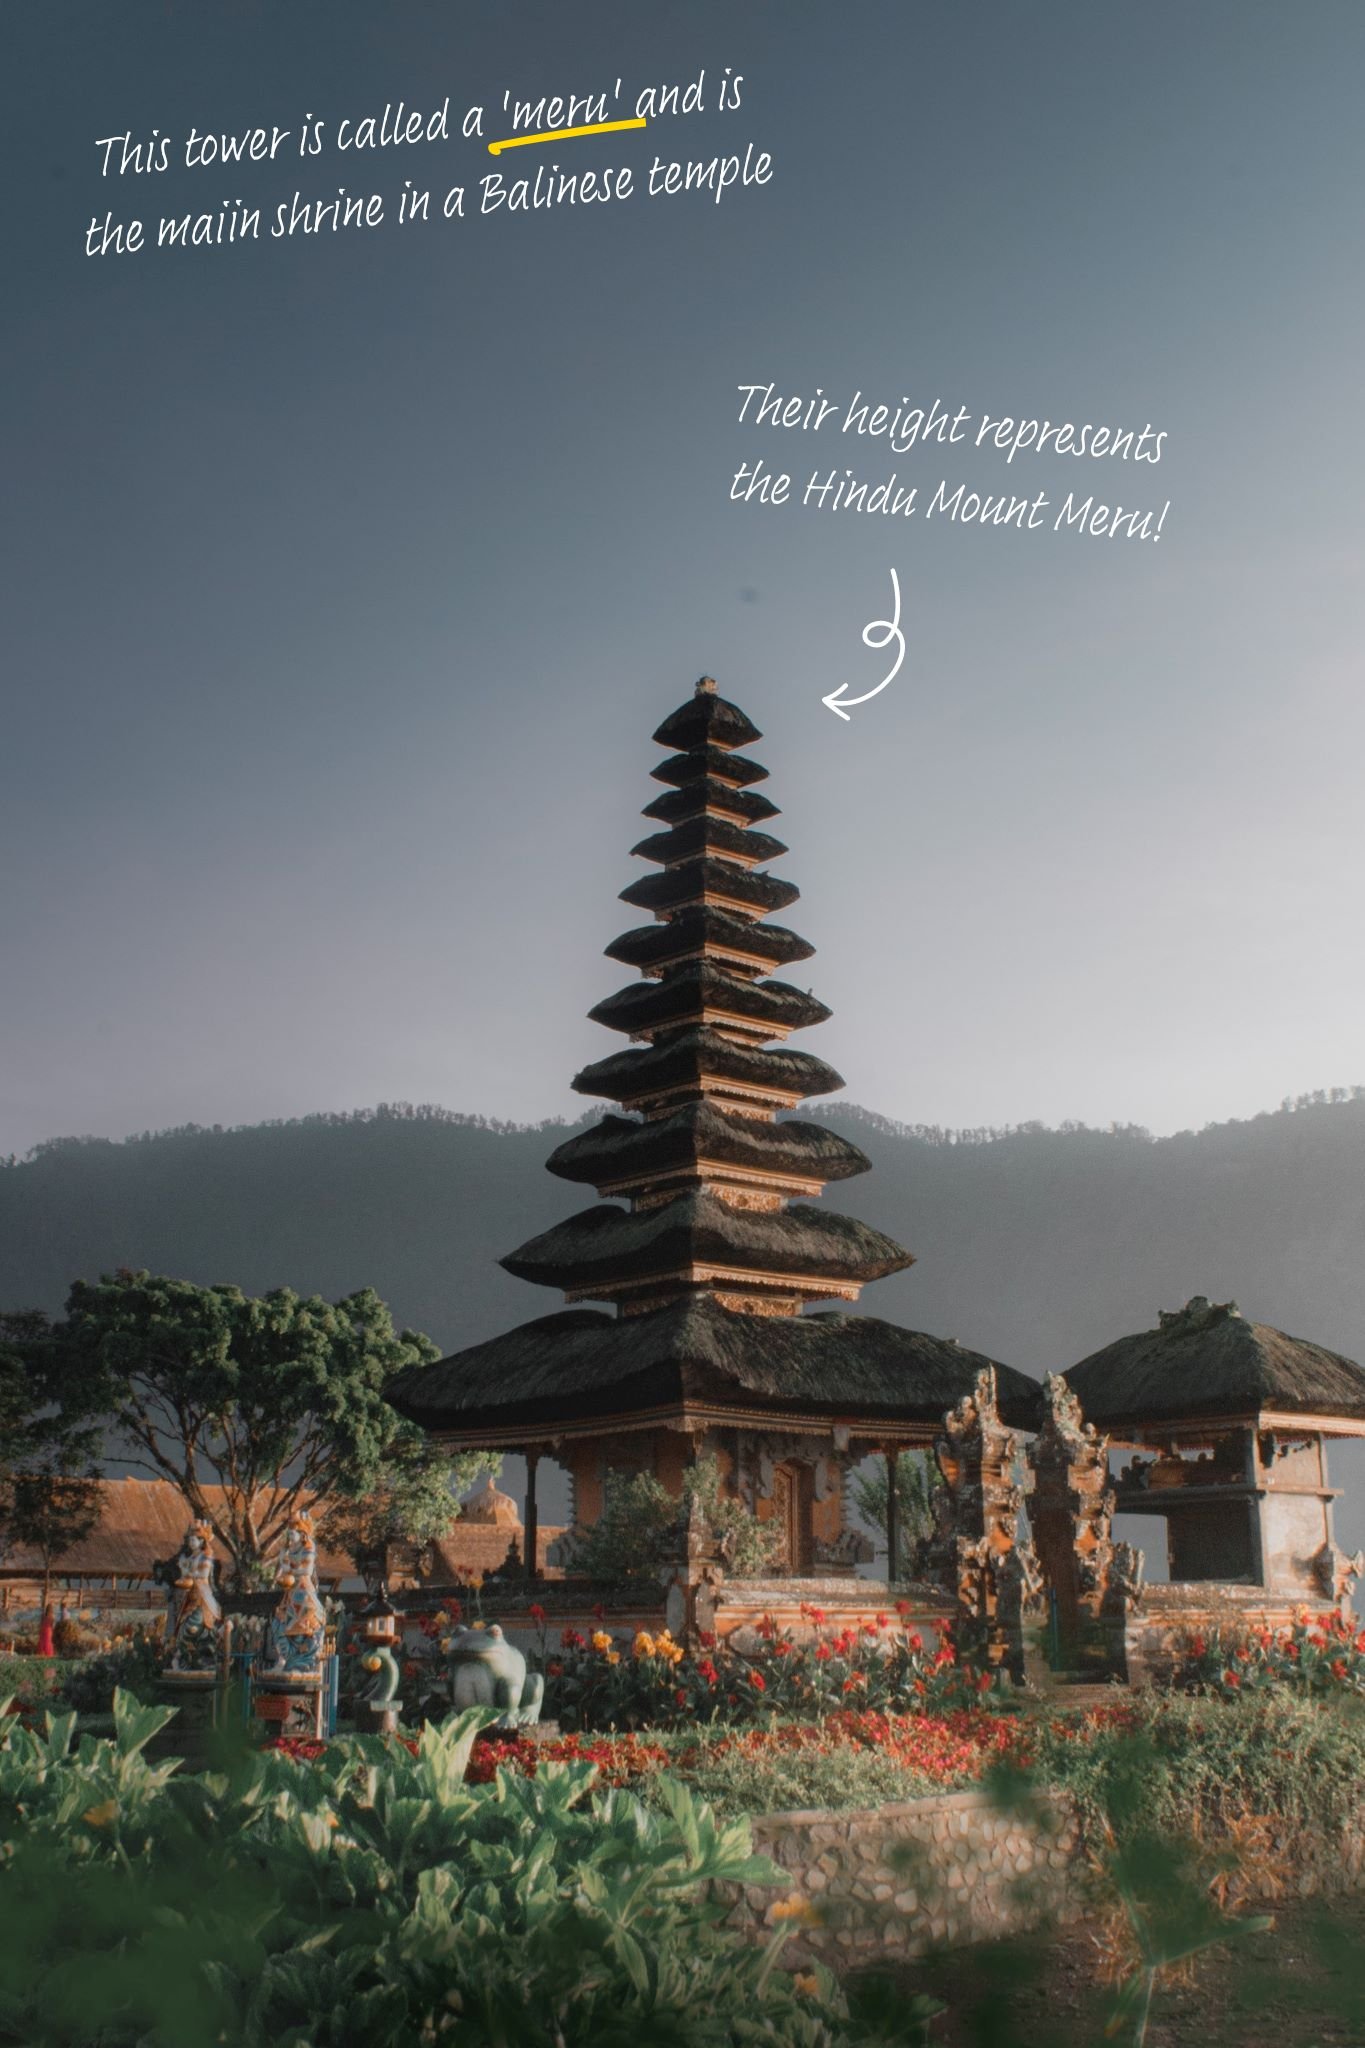 A Balinese temple stands tall in the landscape.